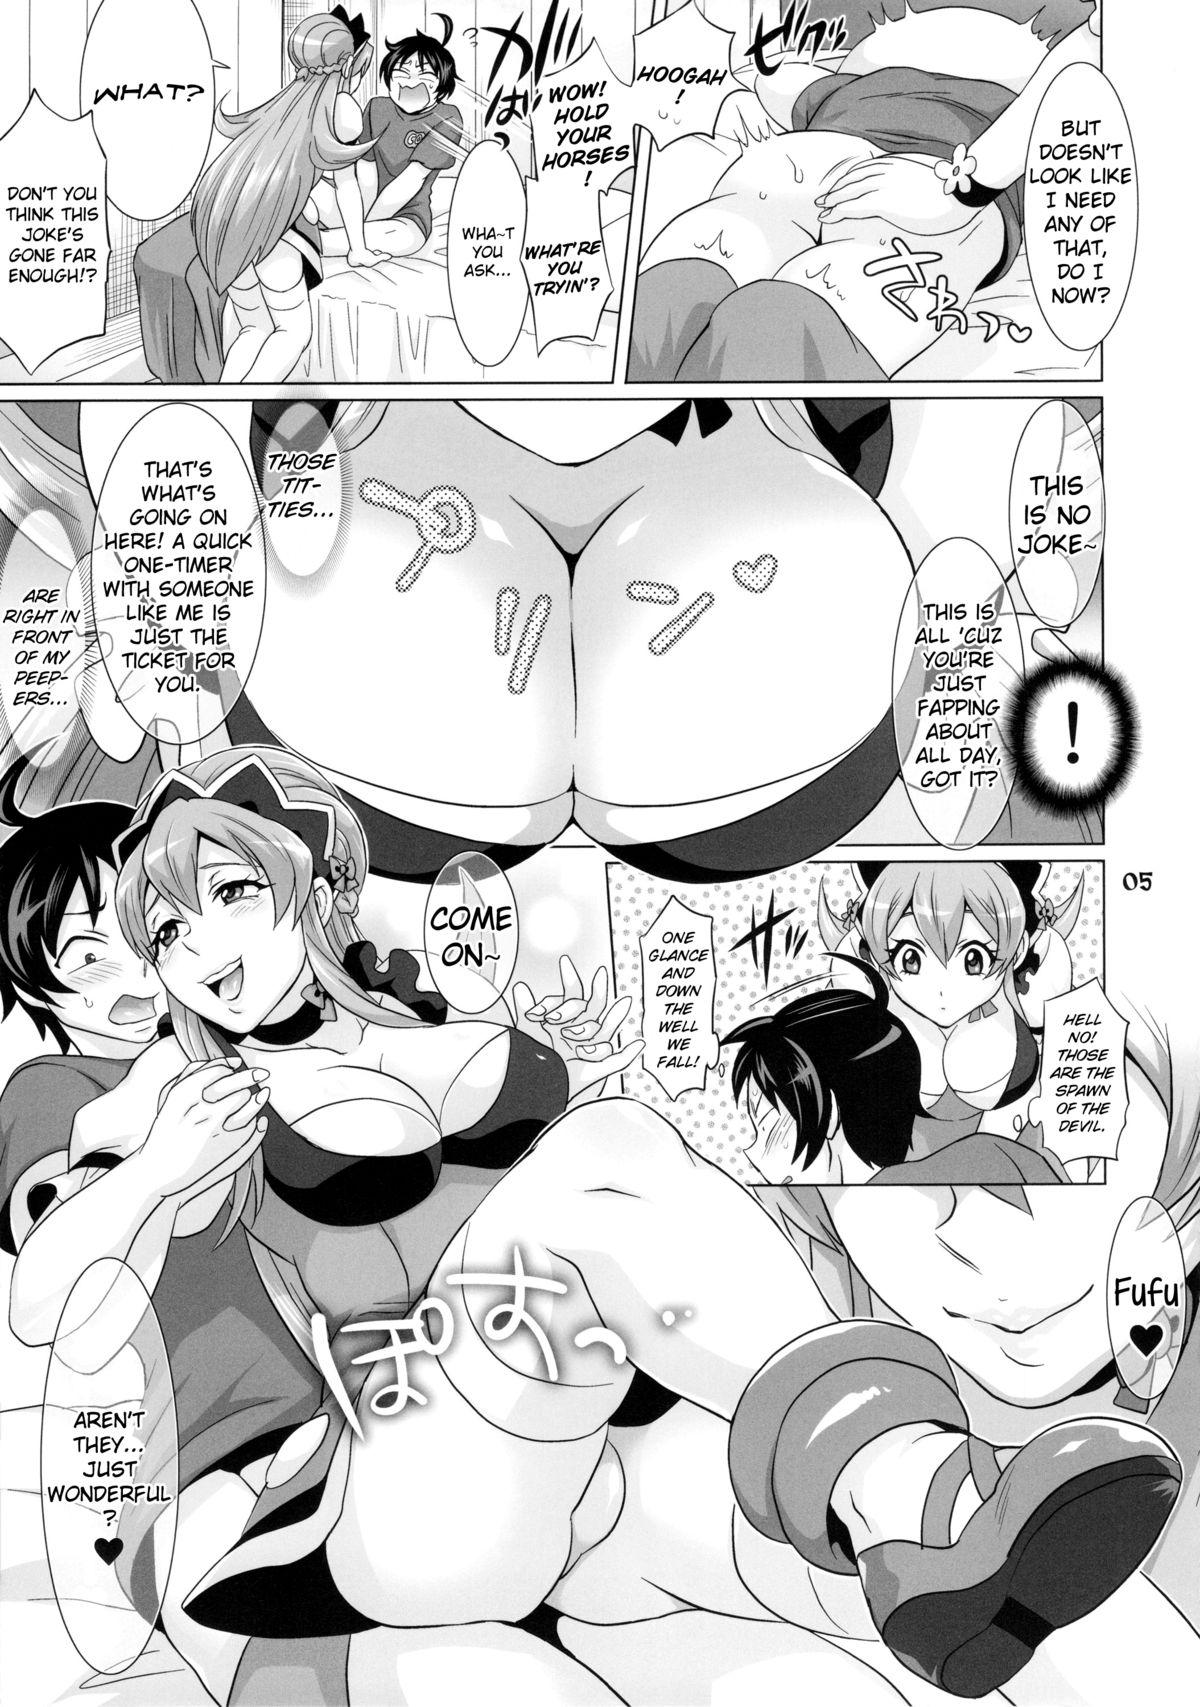 Gaysex DT Soushitsu | DT Loss!? - Ixion saga dt Couple Fucking - Page 6